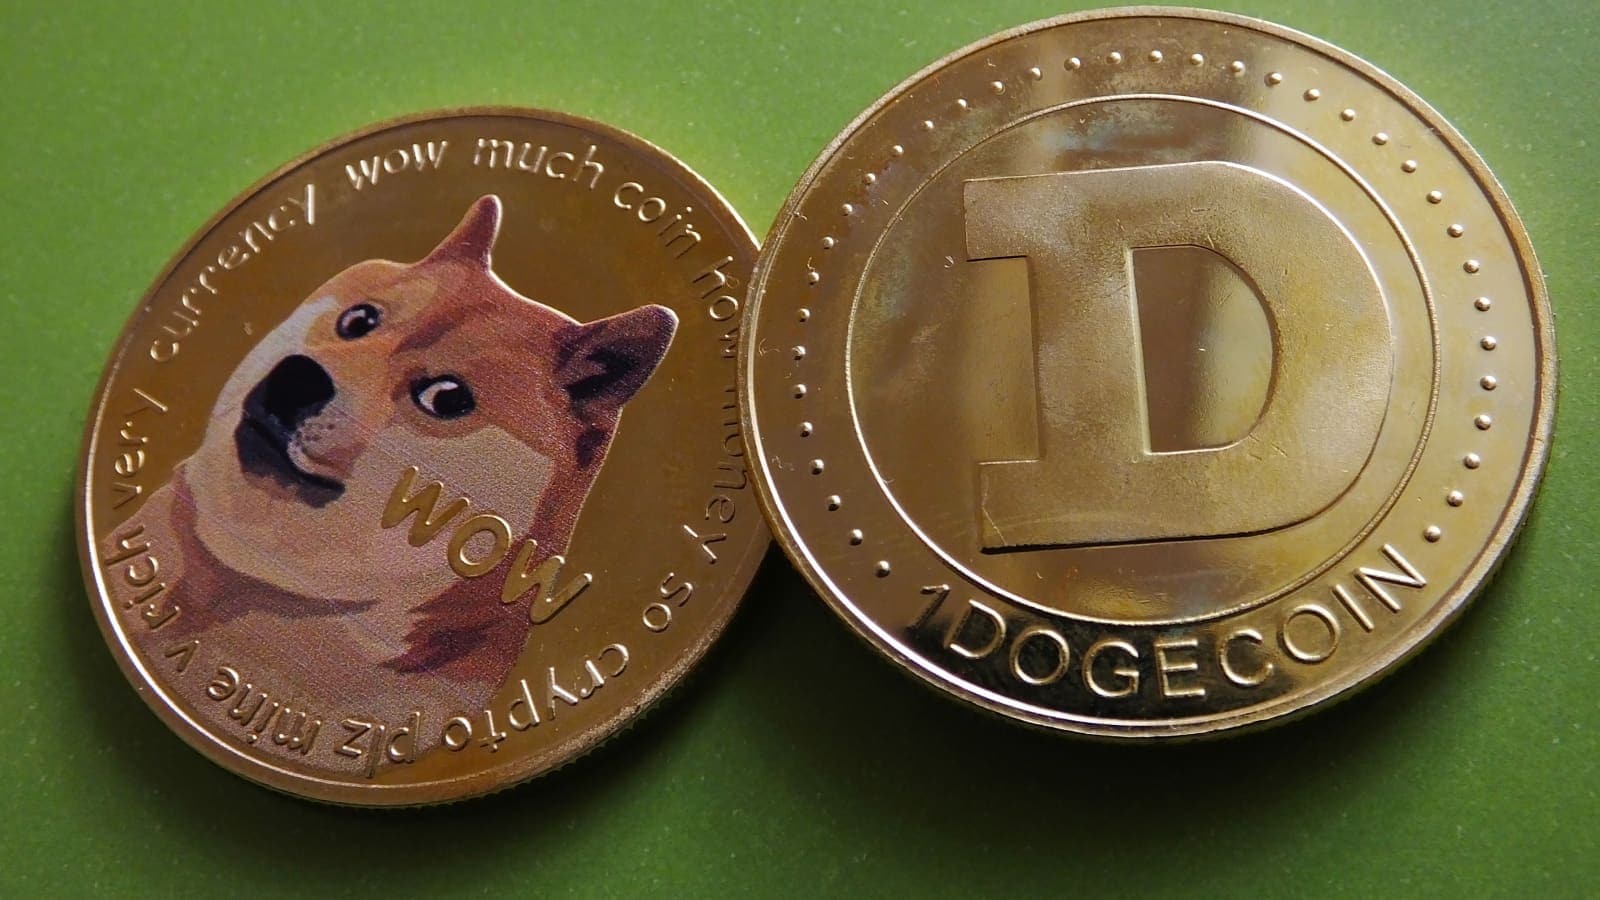 Two Coins of Dogeсoin